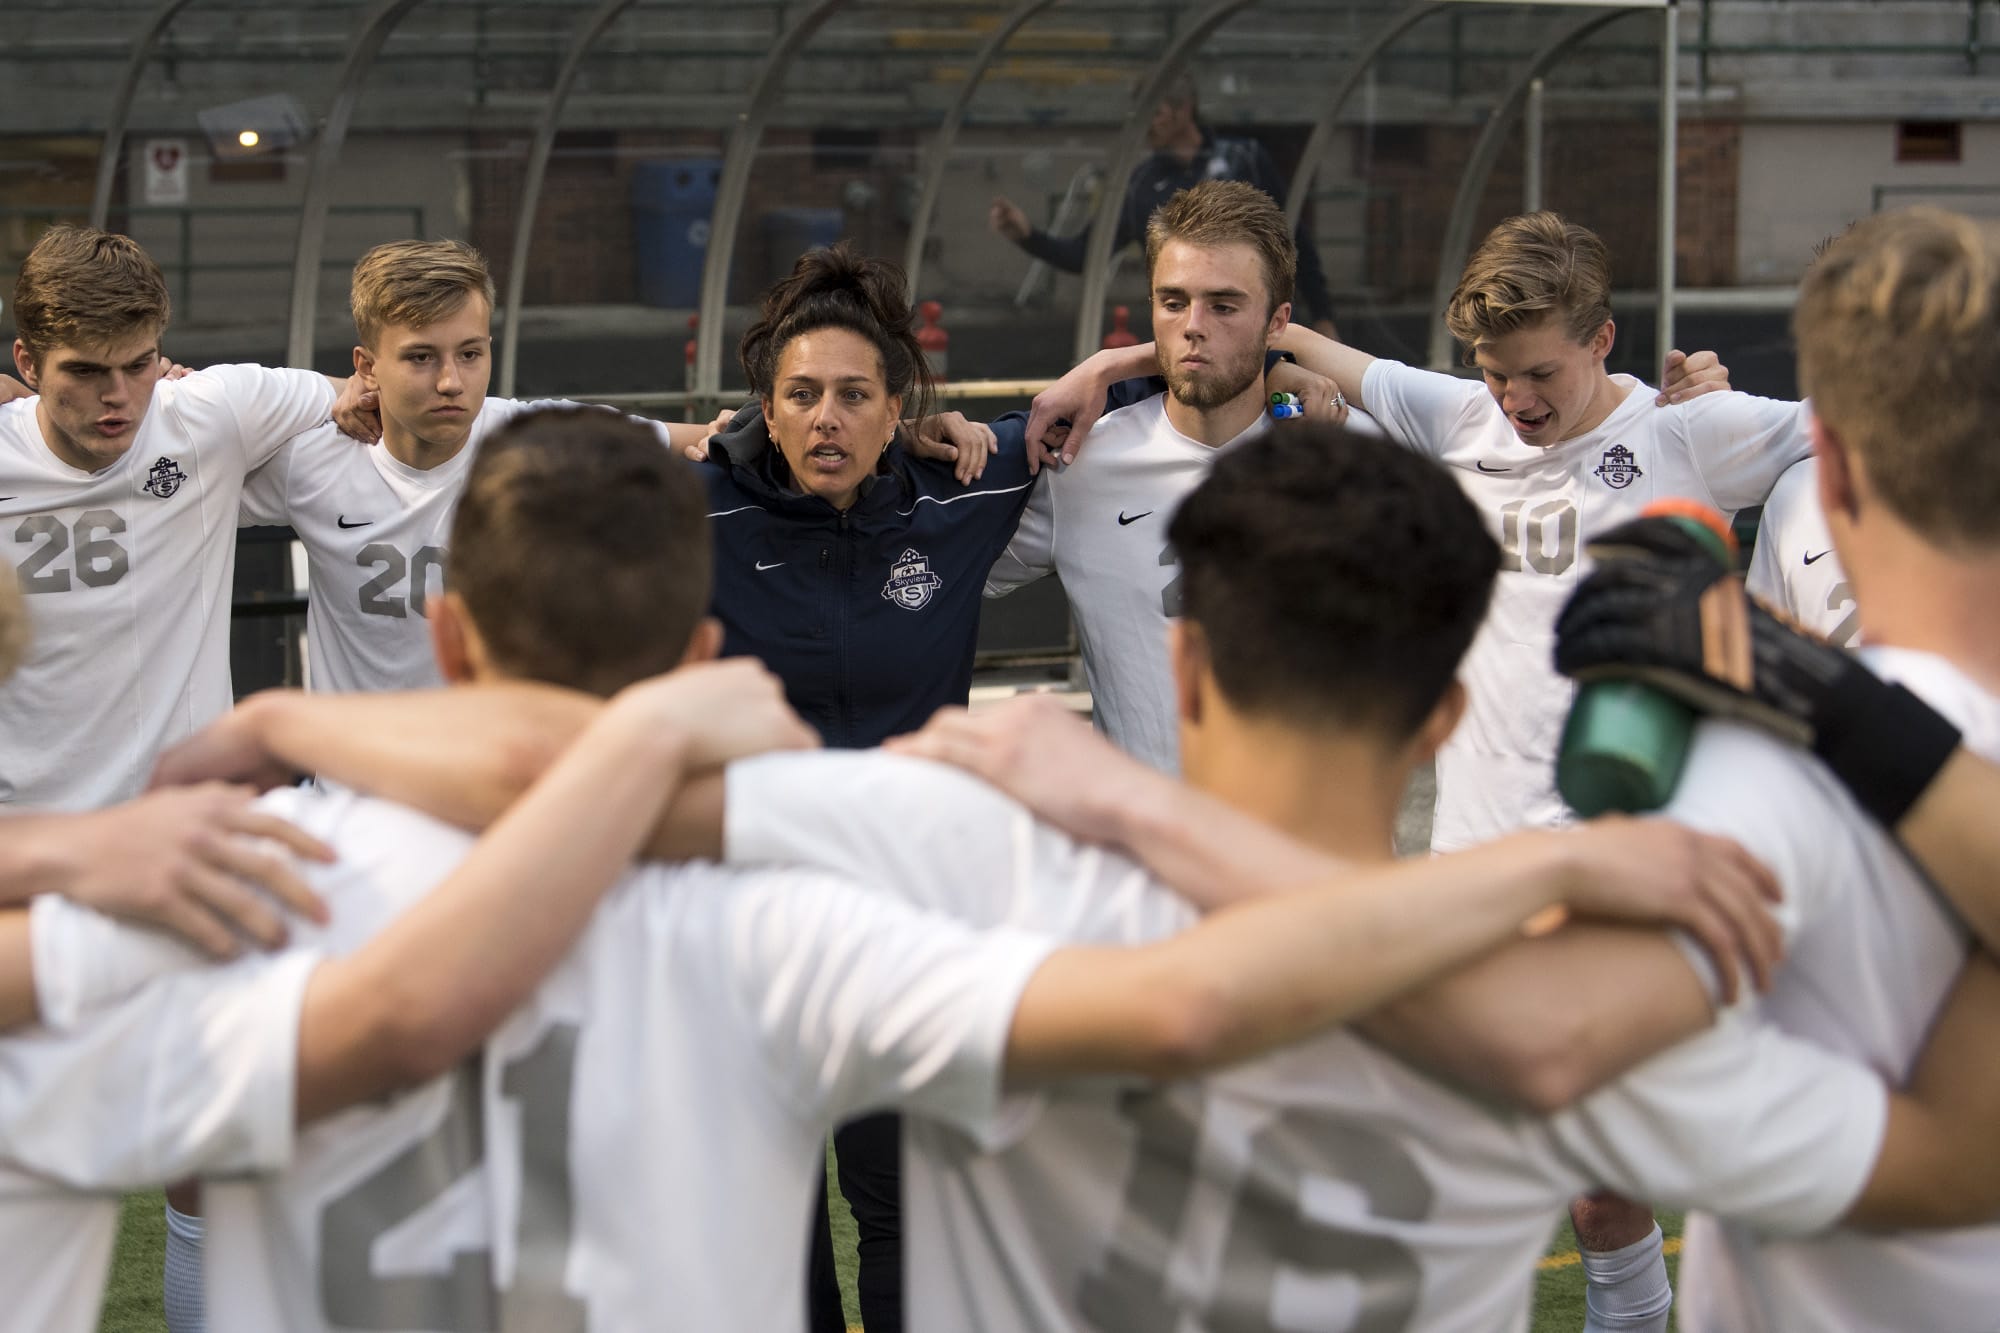 Skyview coach Colleen McKinney talks with her players at halftime during the first round of the Class 4A state playoffs at Kiggins Bowl in Vancouver on Wednesday, May 16, 2018. Skyview lost 4-1.